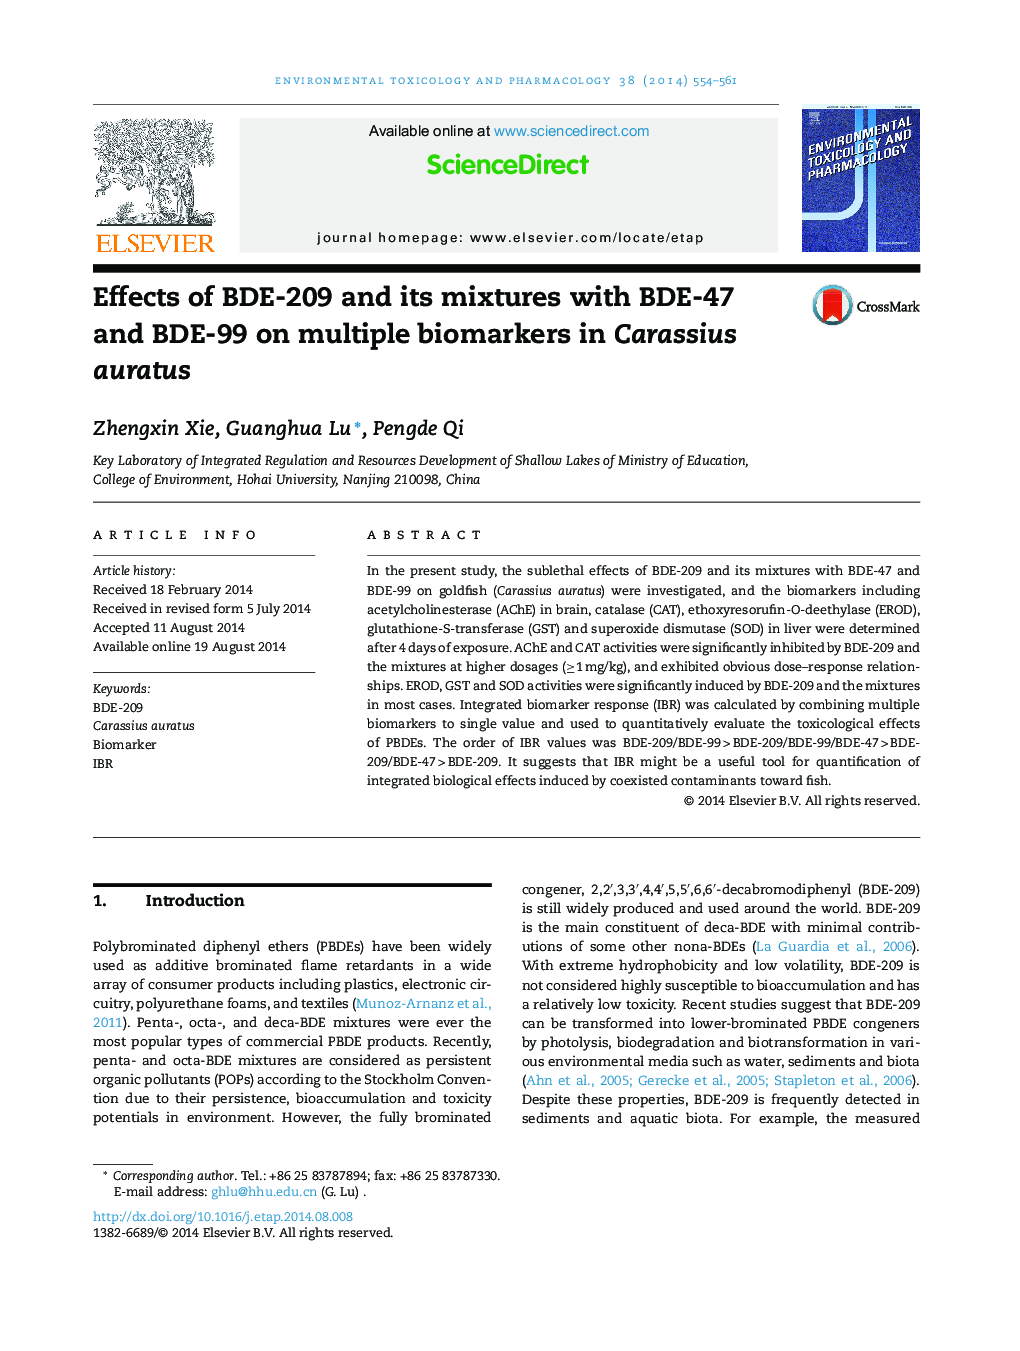 Effects of BDE-209 and its mixtures with BDE-47 and BDE-99 on multiple biomarkers in Carassius auratus